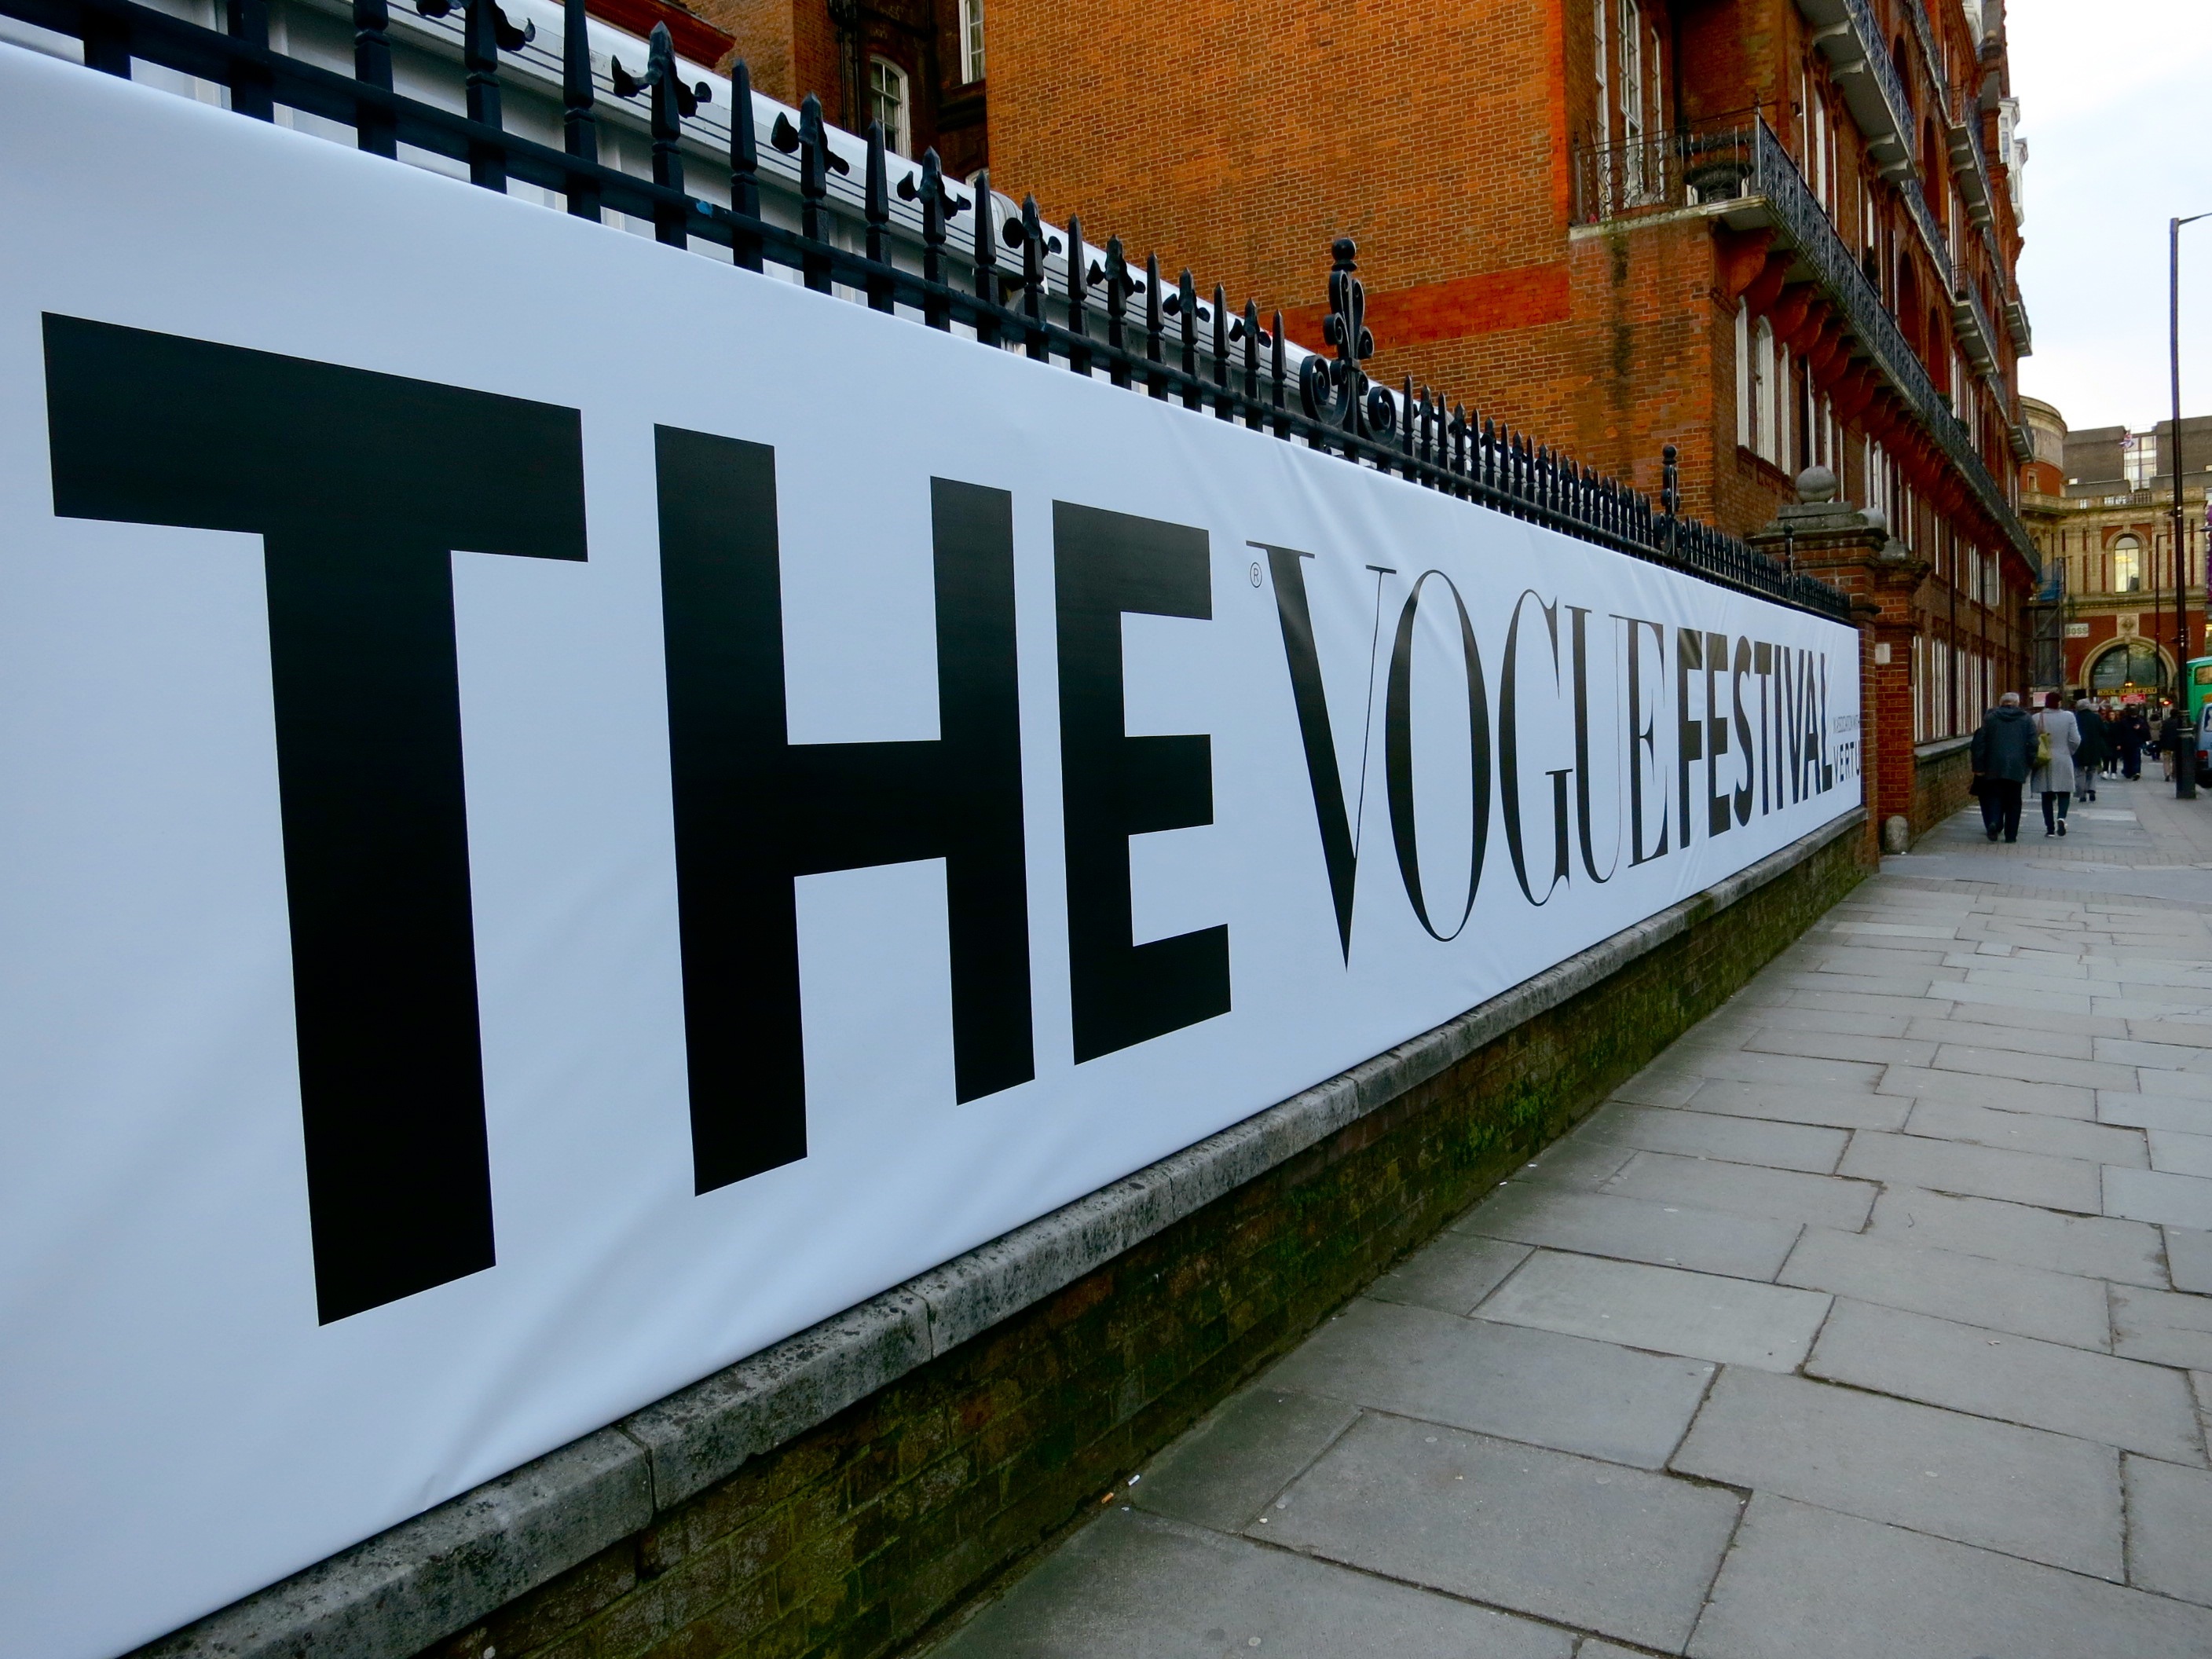 Myfashdiary attends... The Vogue Festival 2012!